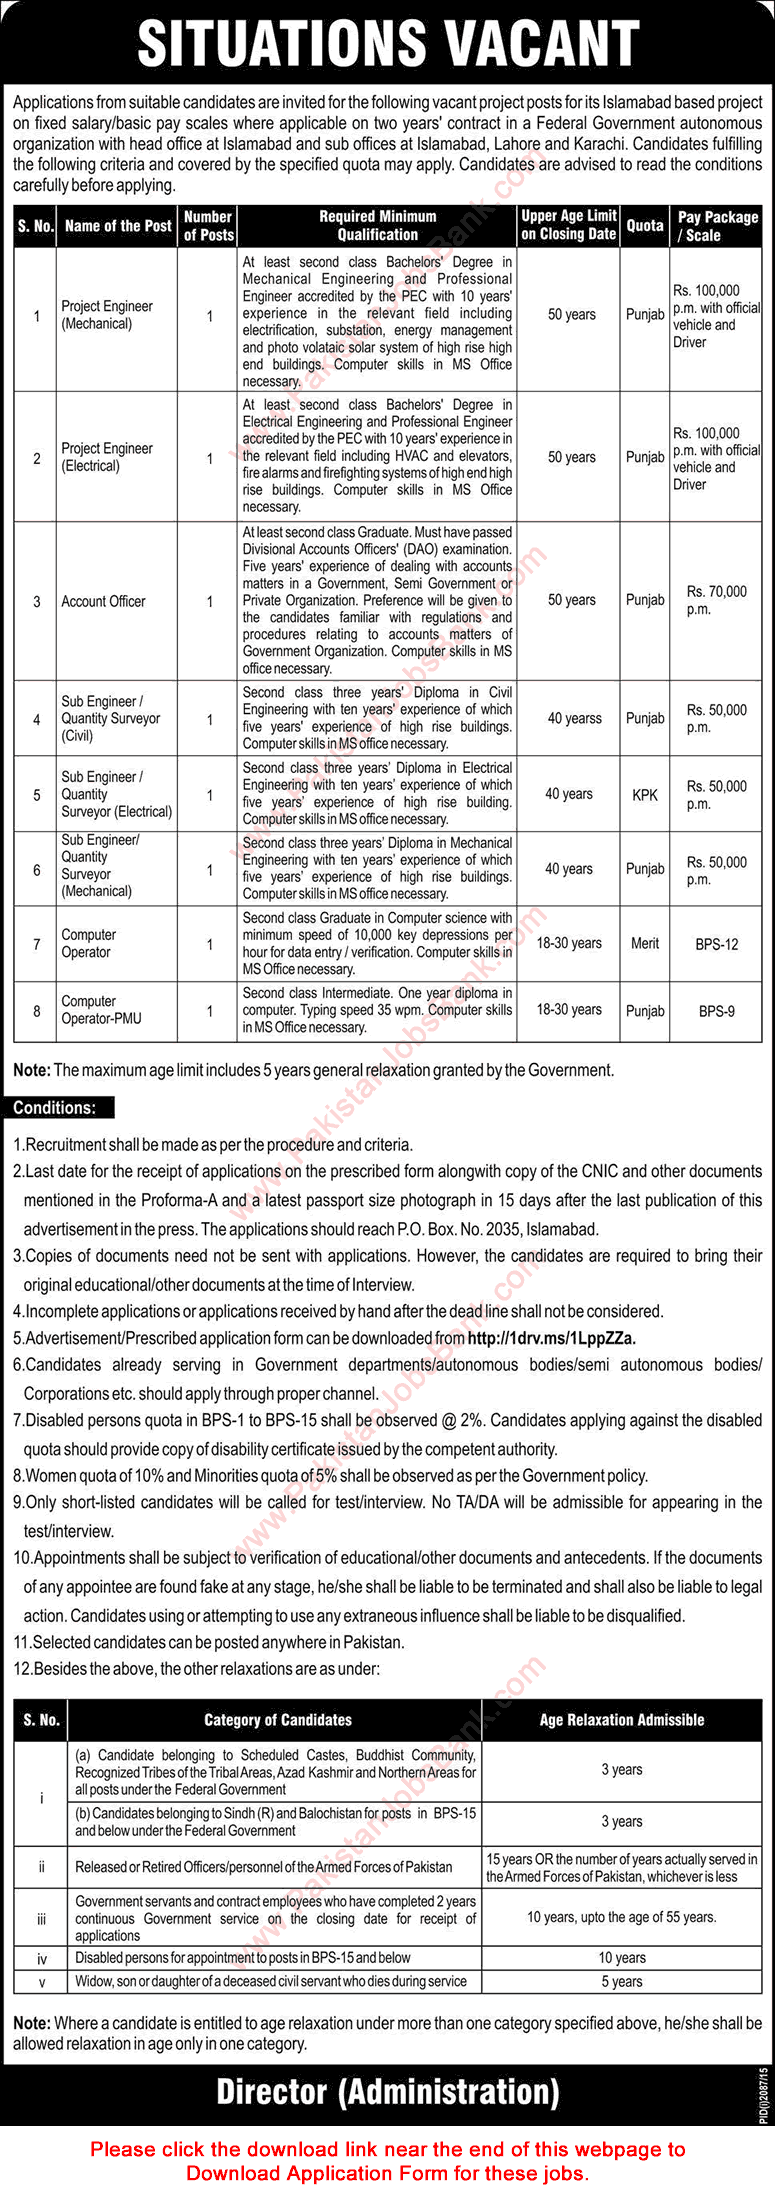 PO Box 2035 Islamabad Jobs 2015 October FEB & GIF Application Form Download Latest